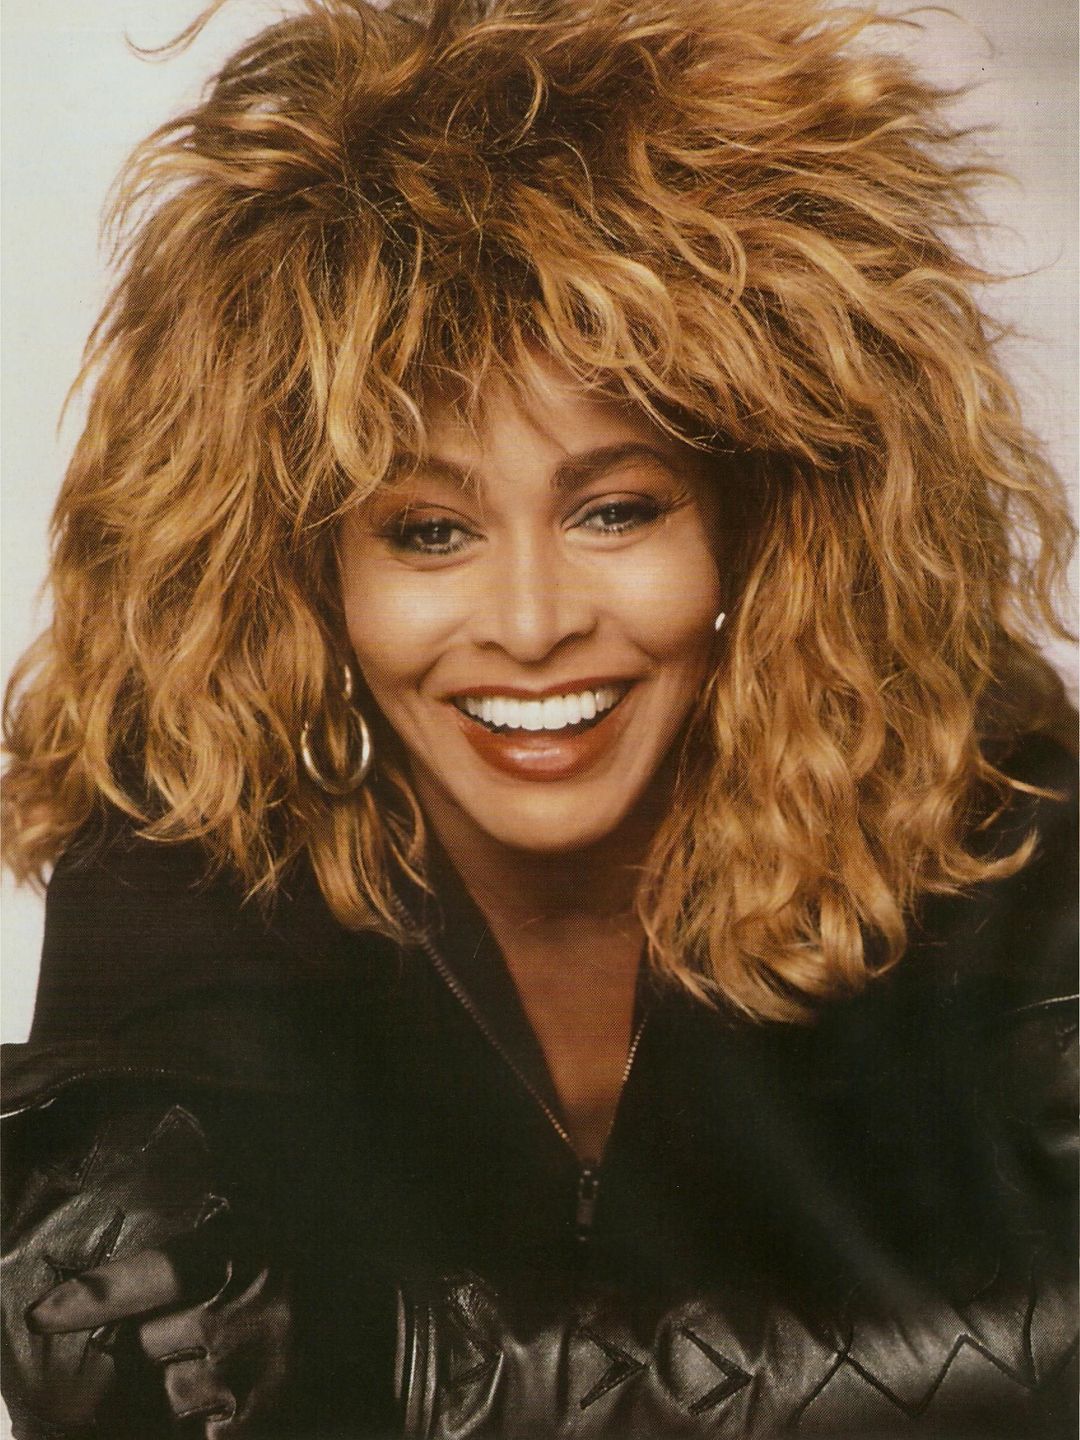 Tina Turner when did she die